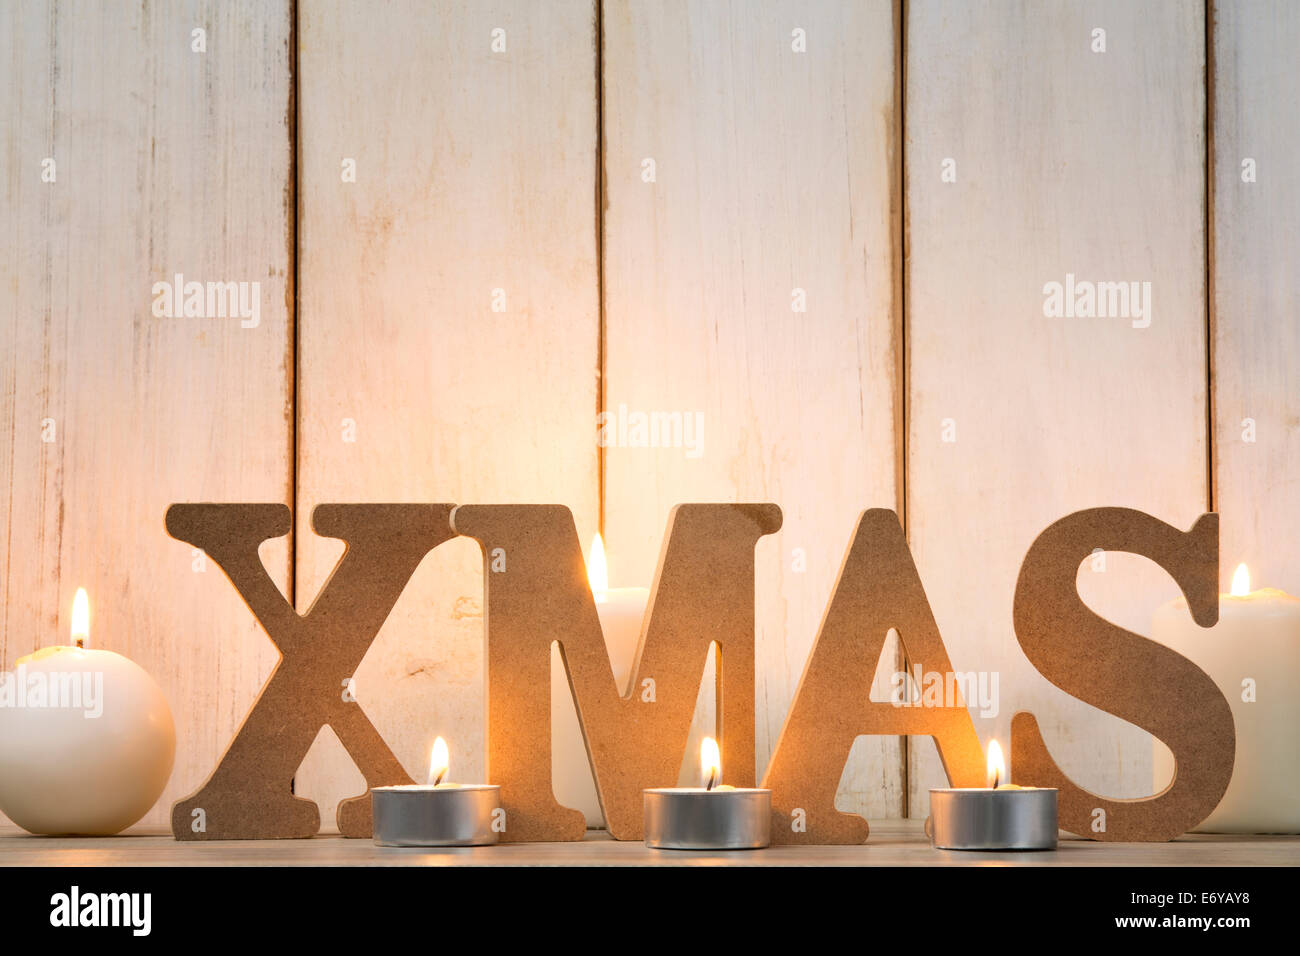 Wooden letters spelling Xmas and burning candles on wood plank Stock Photo